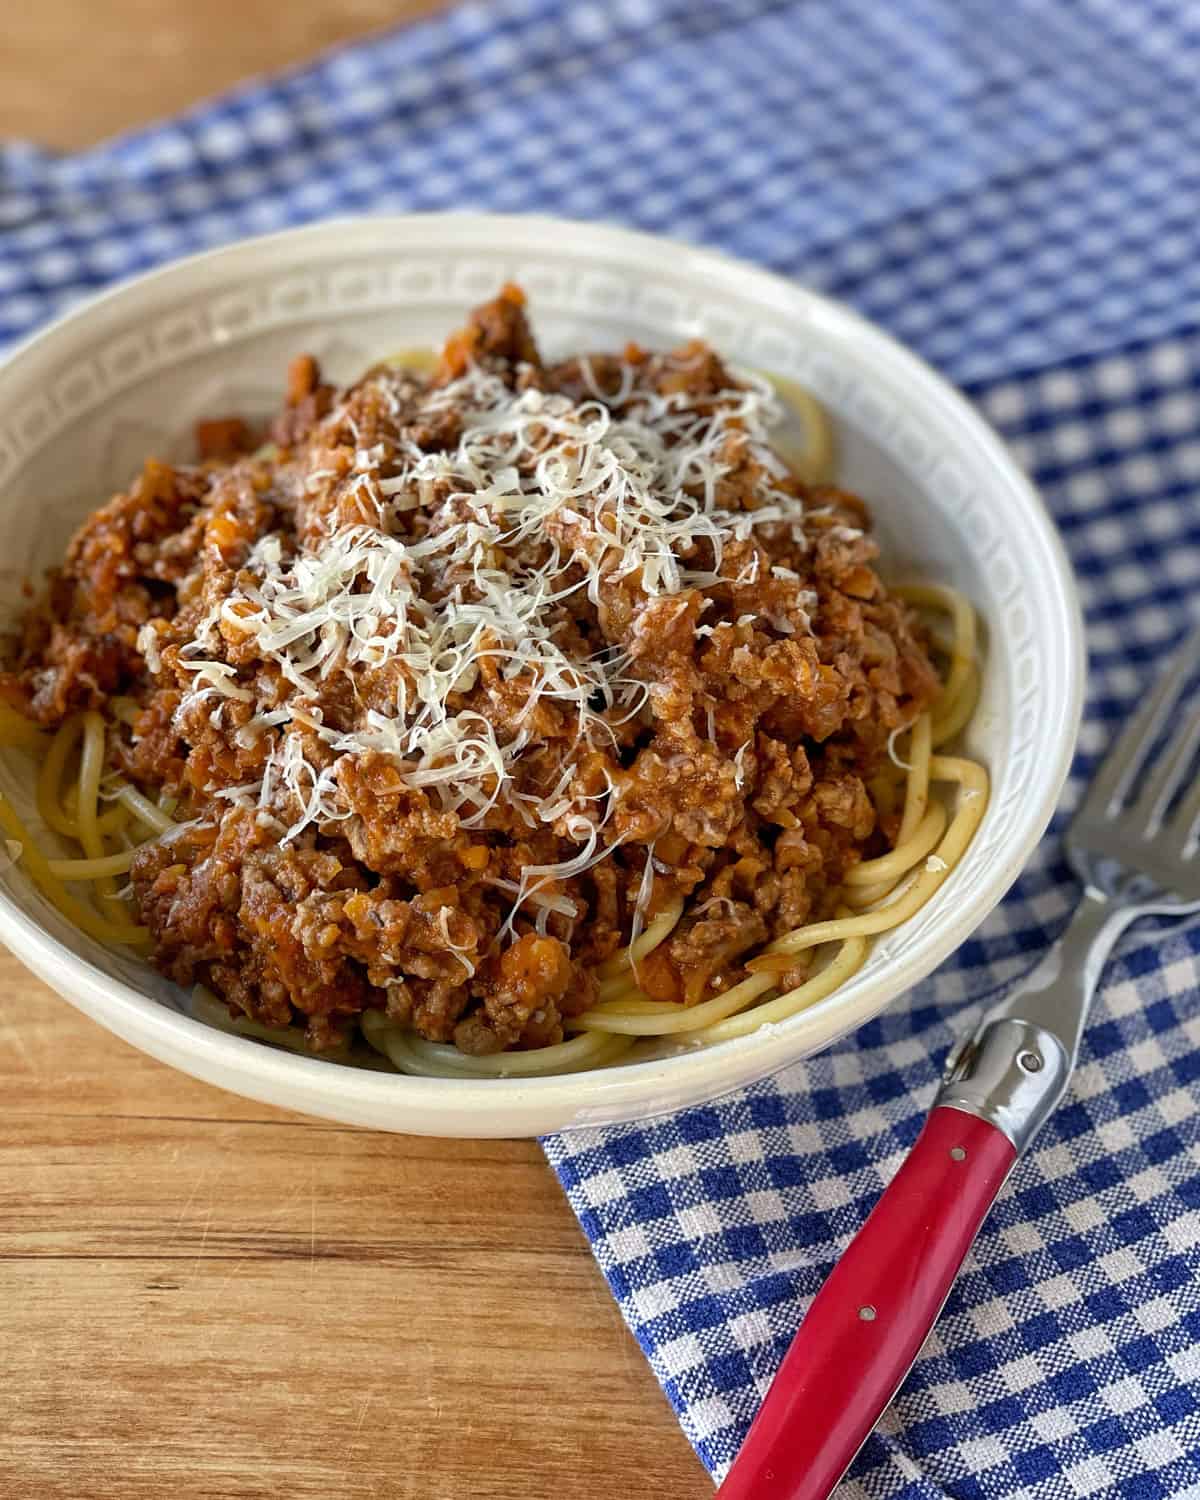 Spaghetti Bolognese in a white bowl on a checked tablecloth.